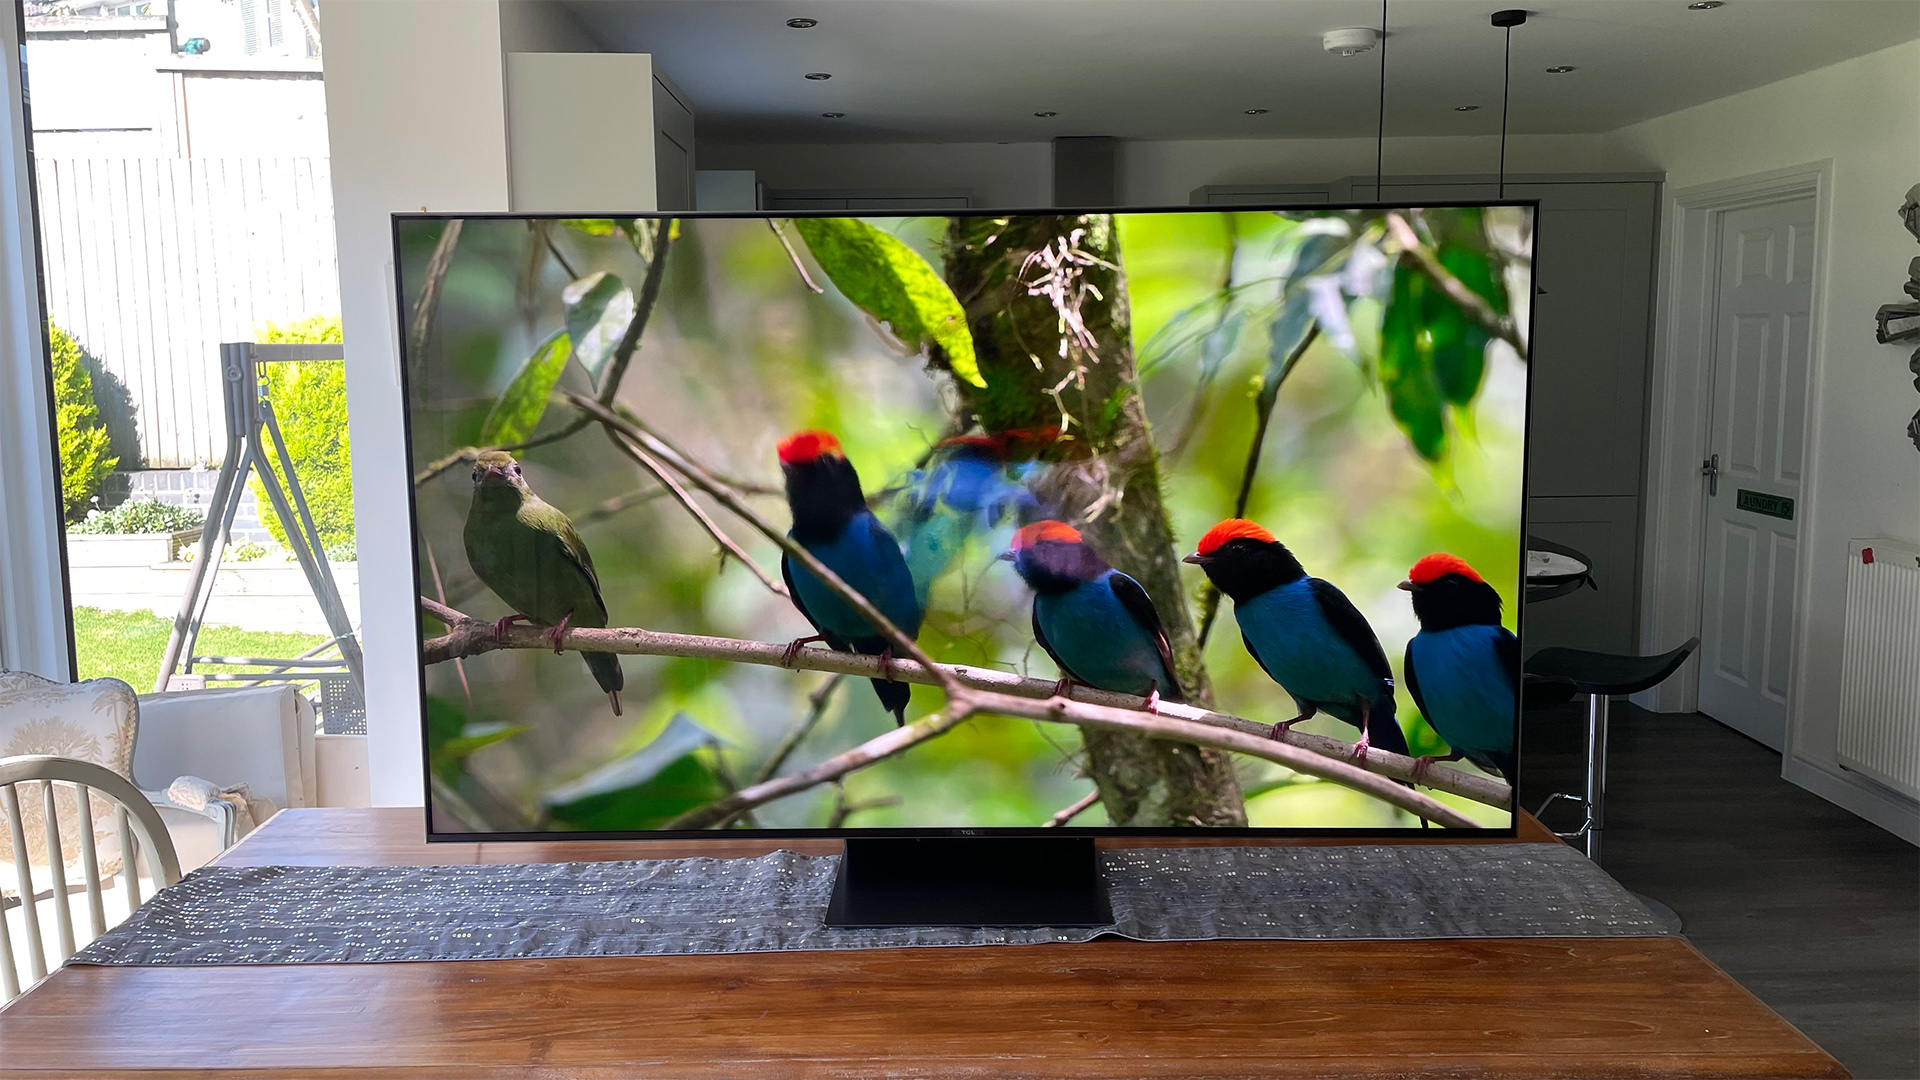 TV on a tabletop displaying birds